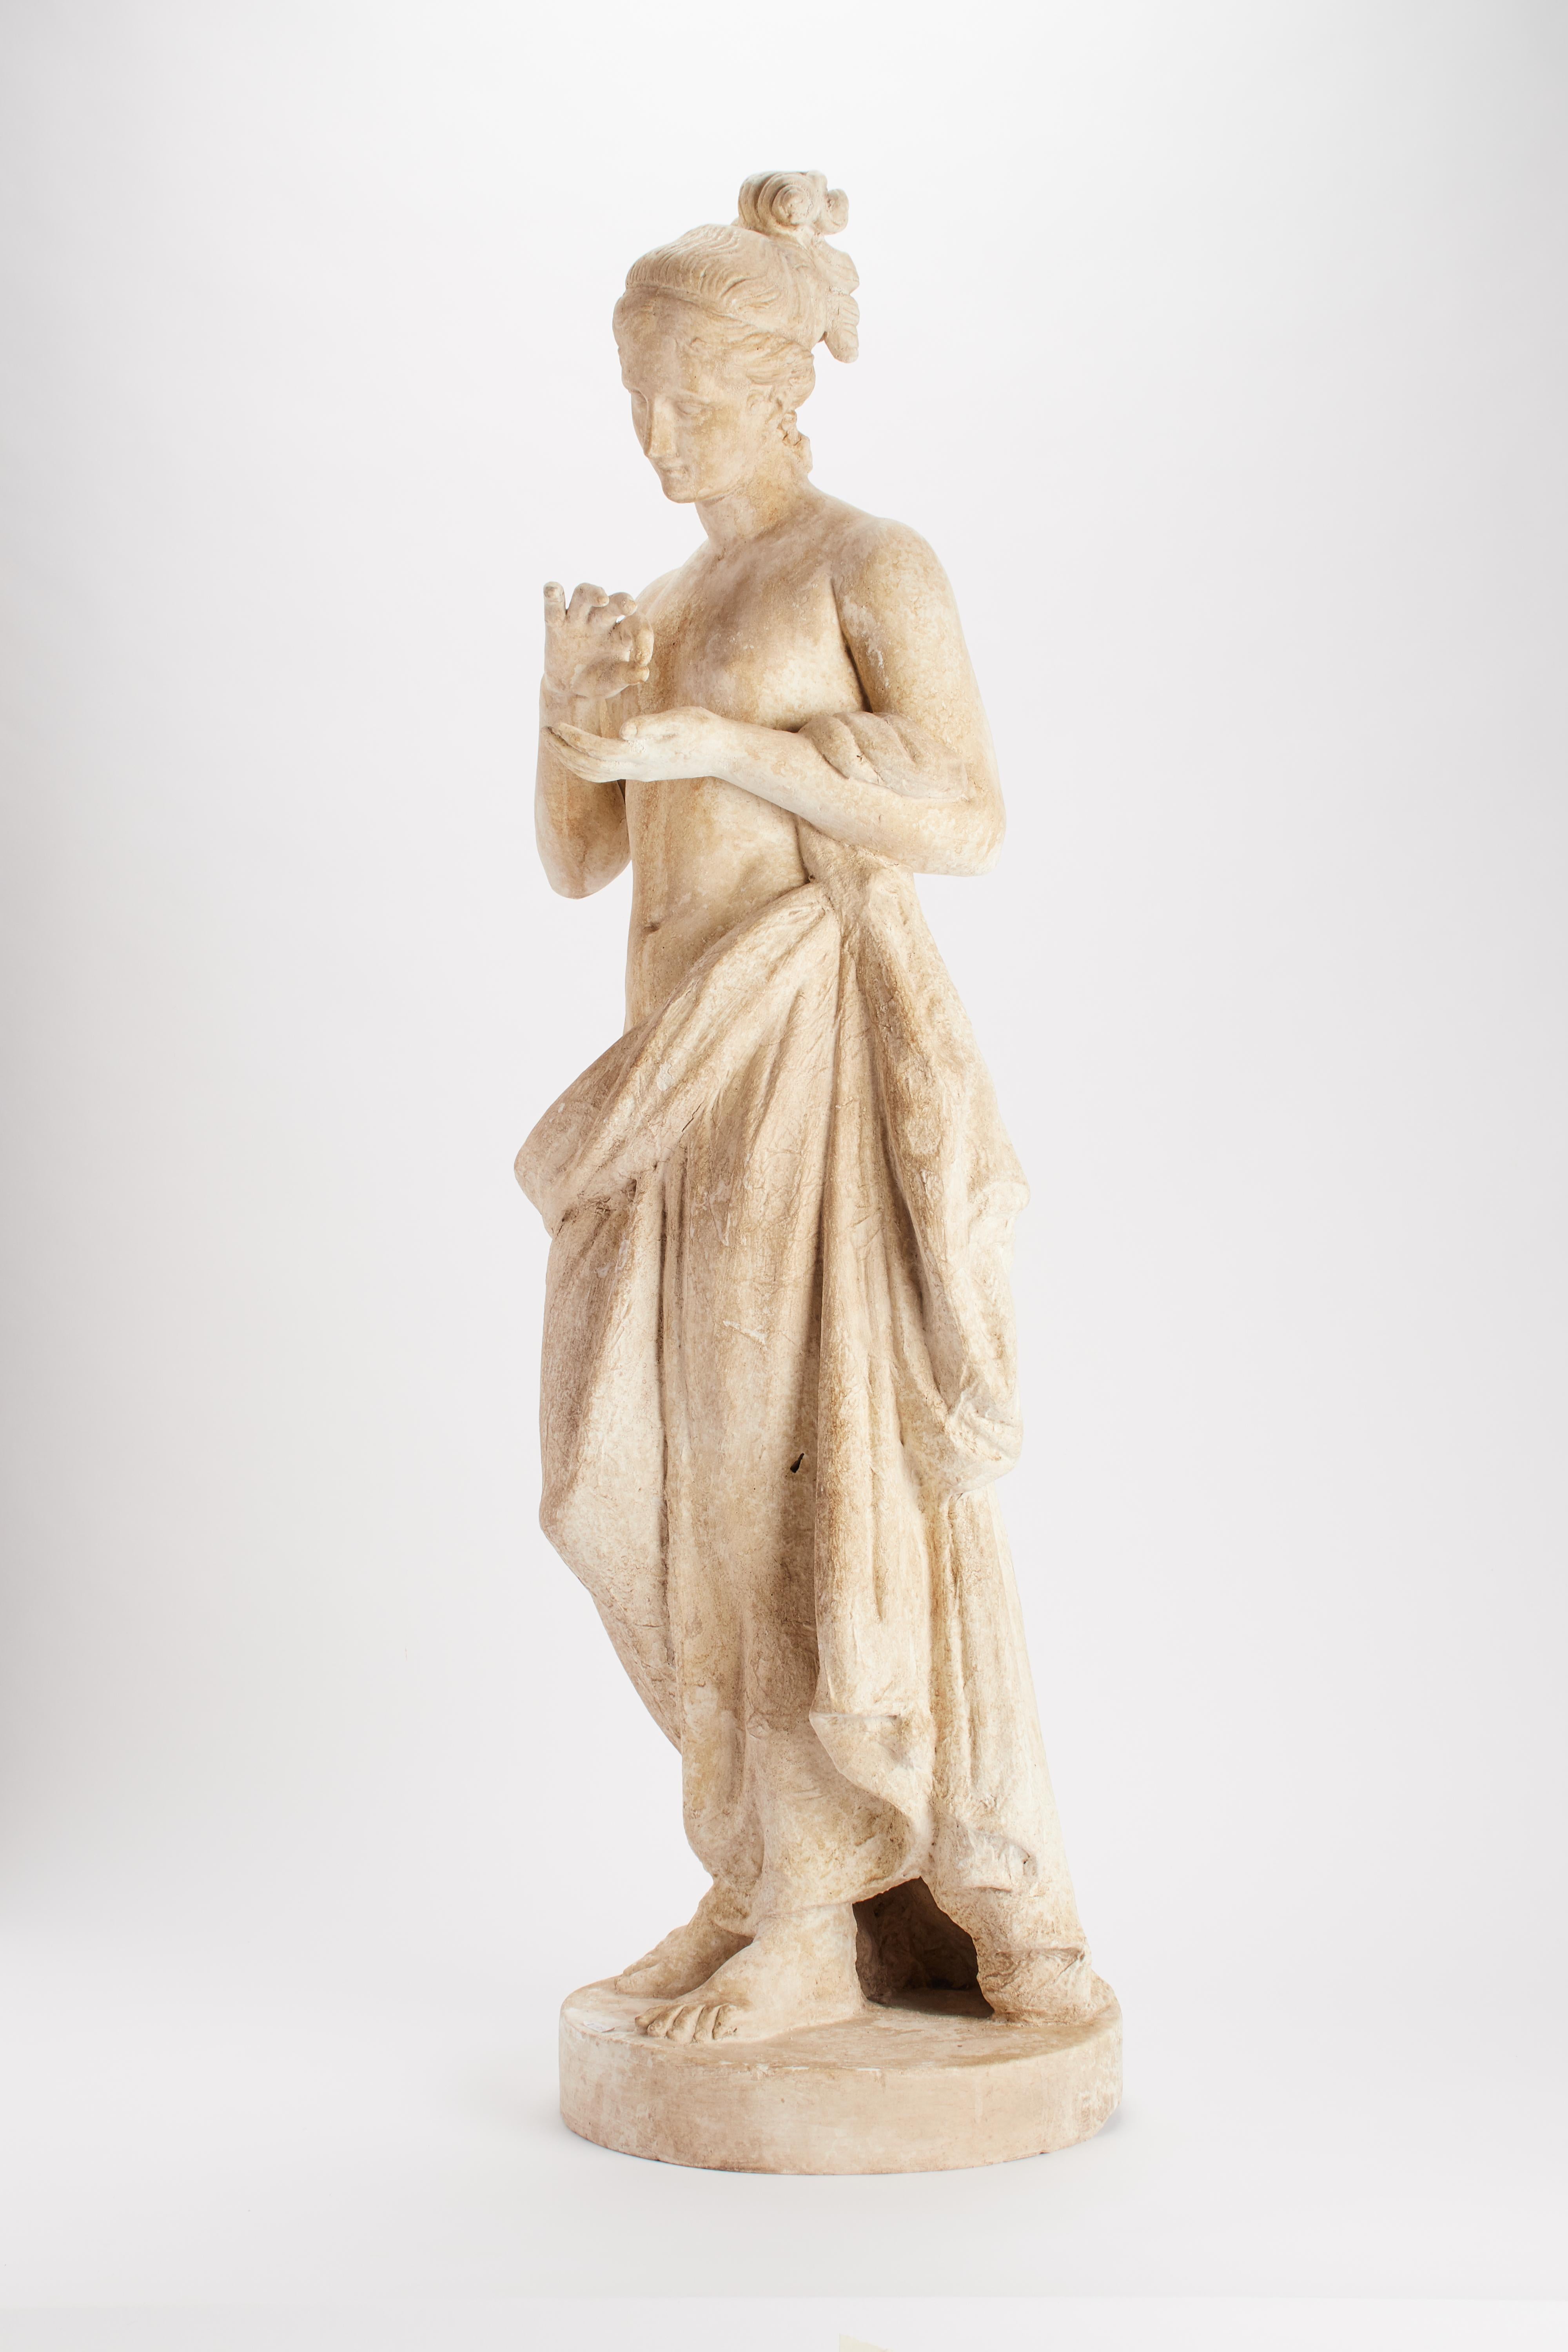 Over the plaster round base is set the cast of a sculpture of a Psyche. Plaster cast for drawing teaching in Academy. Made out of plaster and painted paper mâché, Italy, circa 1890.